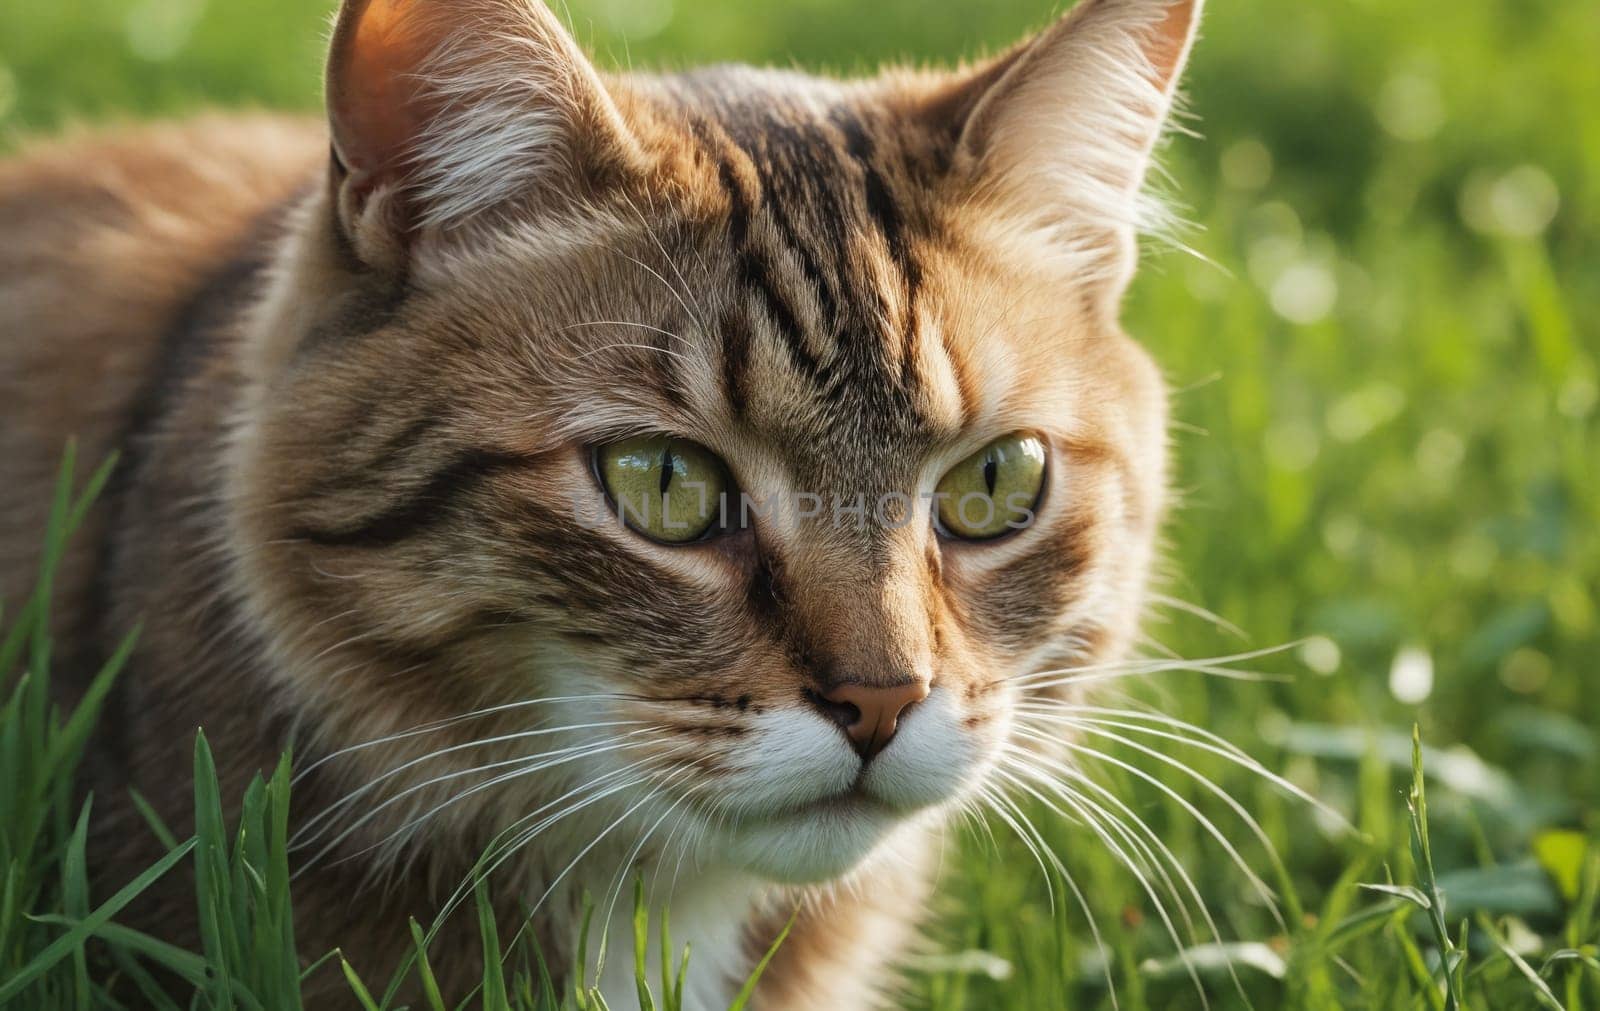 A closeup of a carnivore feline Felidae, with whiskers and a snout, standing in the grass and looking at the camera. Terrestrial animal near terrestrial plants